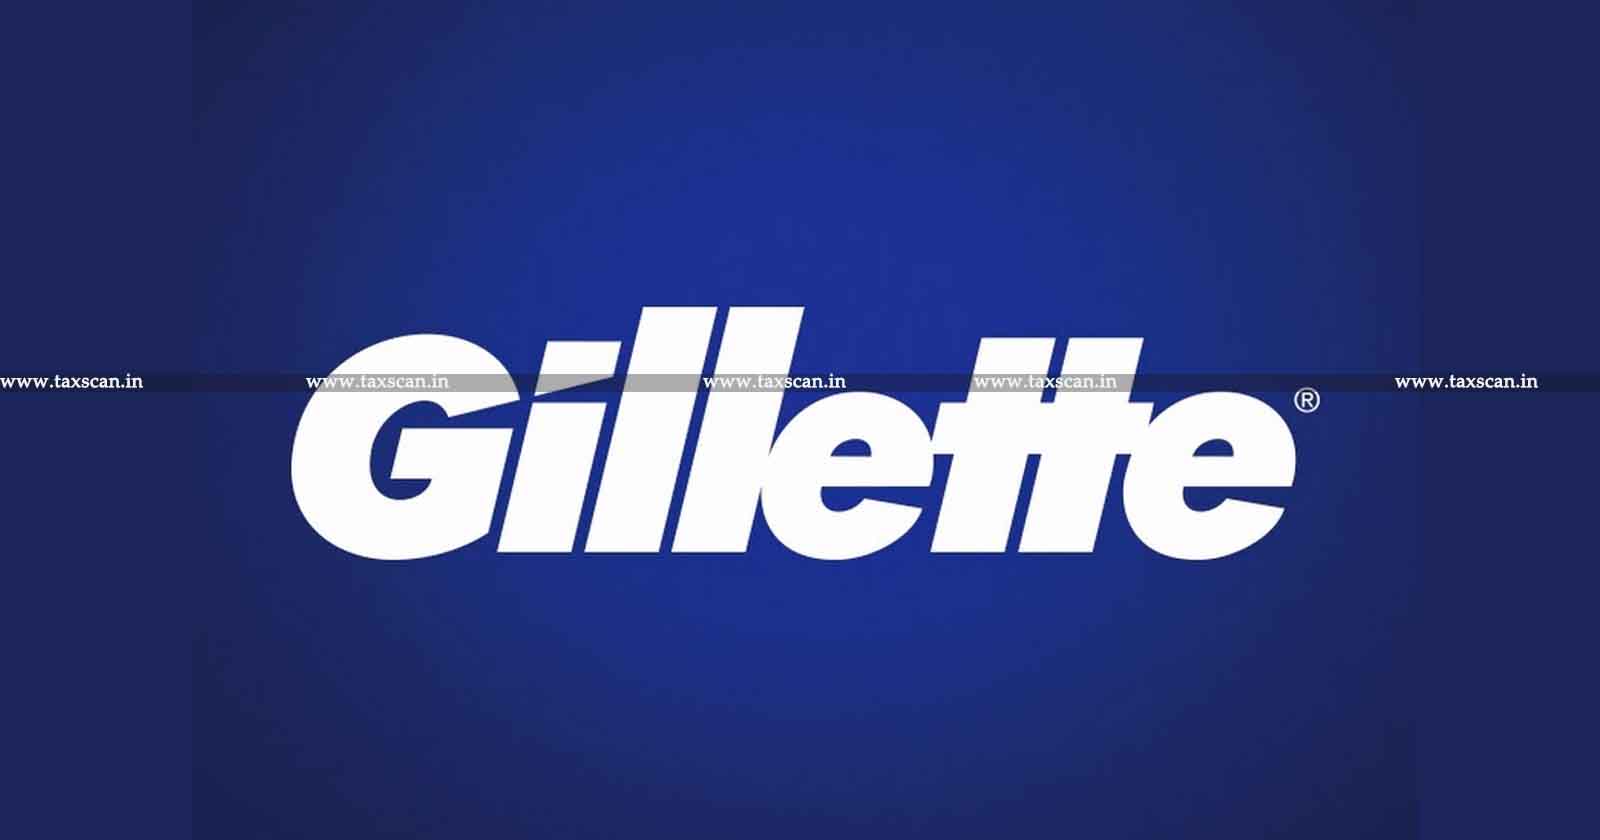 Relief to Gillette India: CESTAT Quashes Rejection of Excise Duty Refund claim of Approx. 1.4 crores on Clearance of Shaving Razor on ground of Non-verification of Cost Accountant Certificate